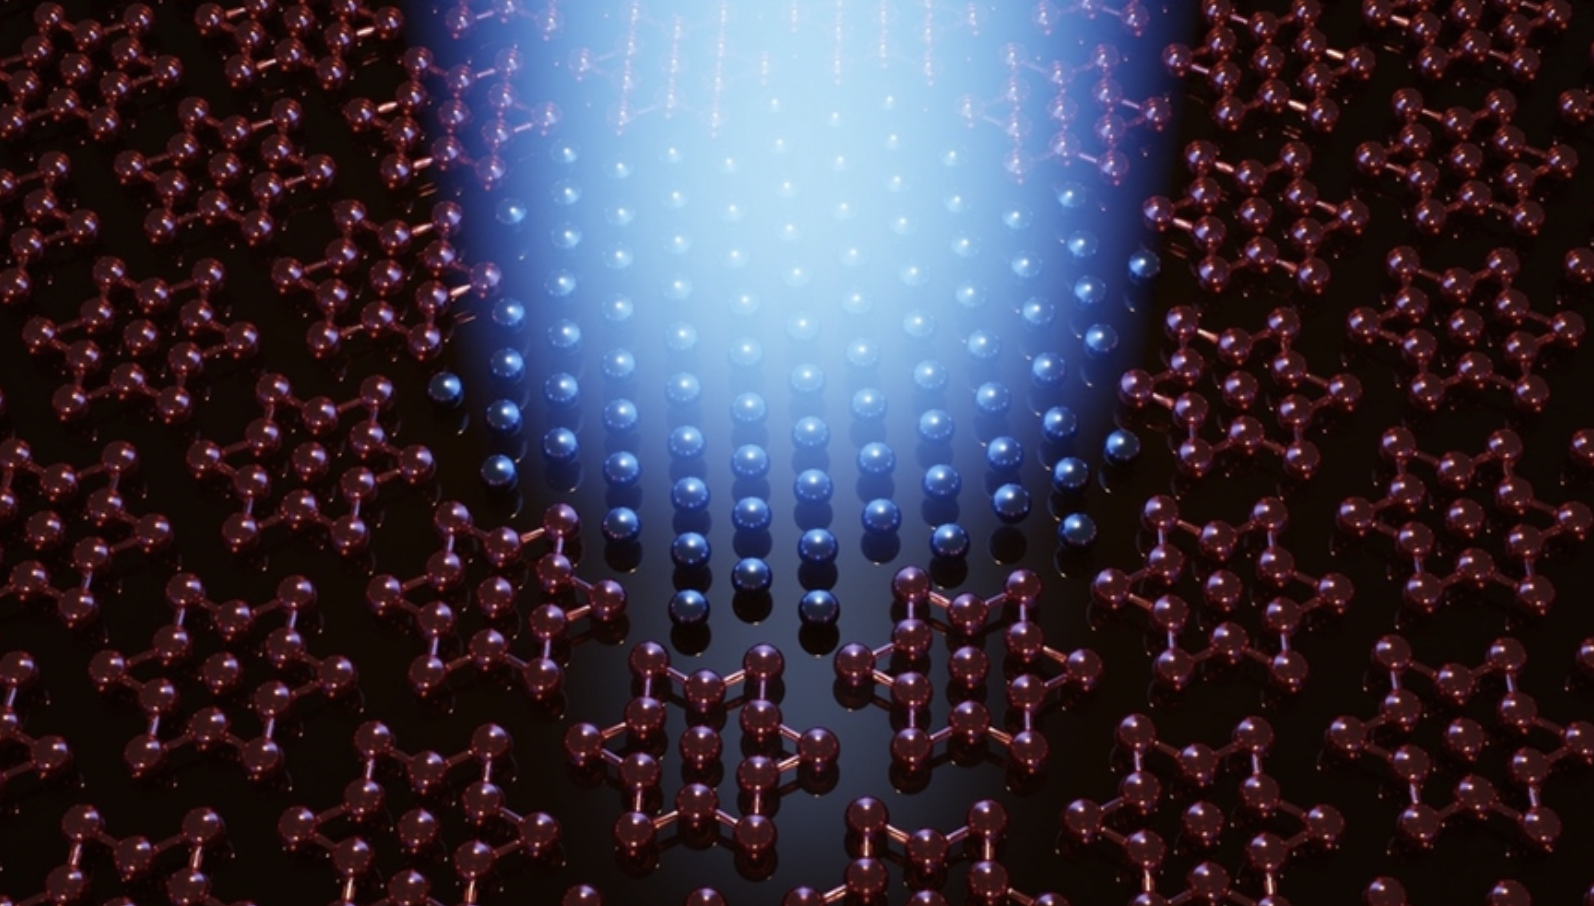 Physicists have done an amazing thing.  With the help of light, they changed the phase of matter